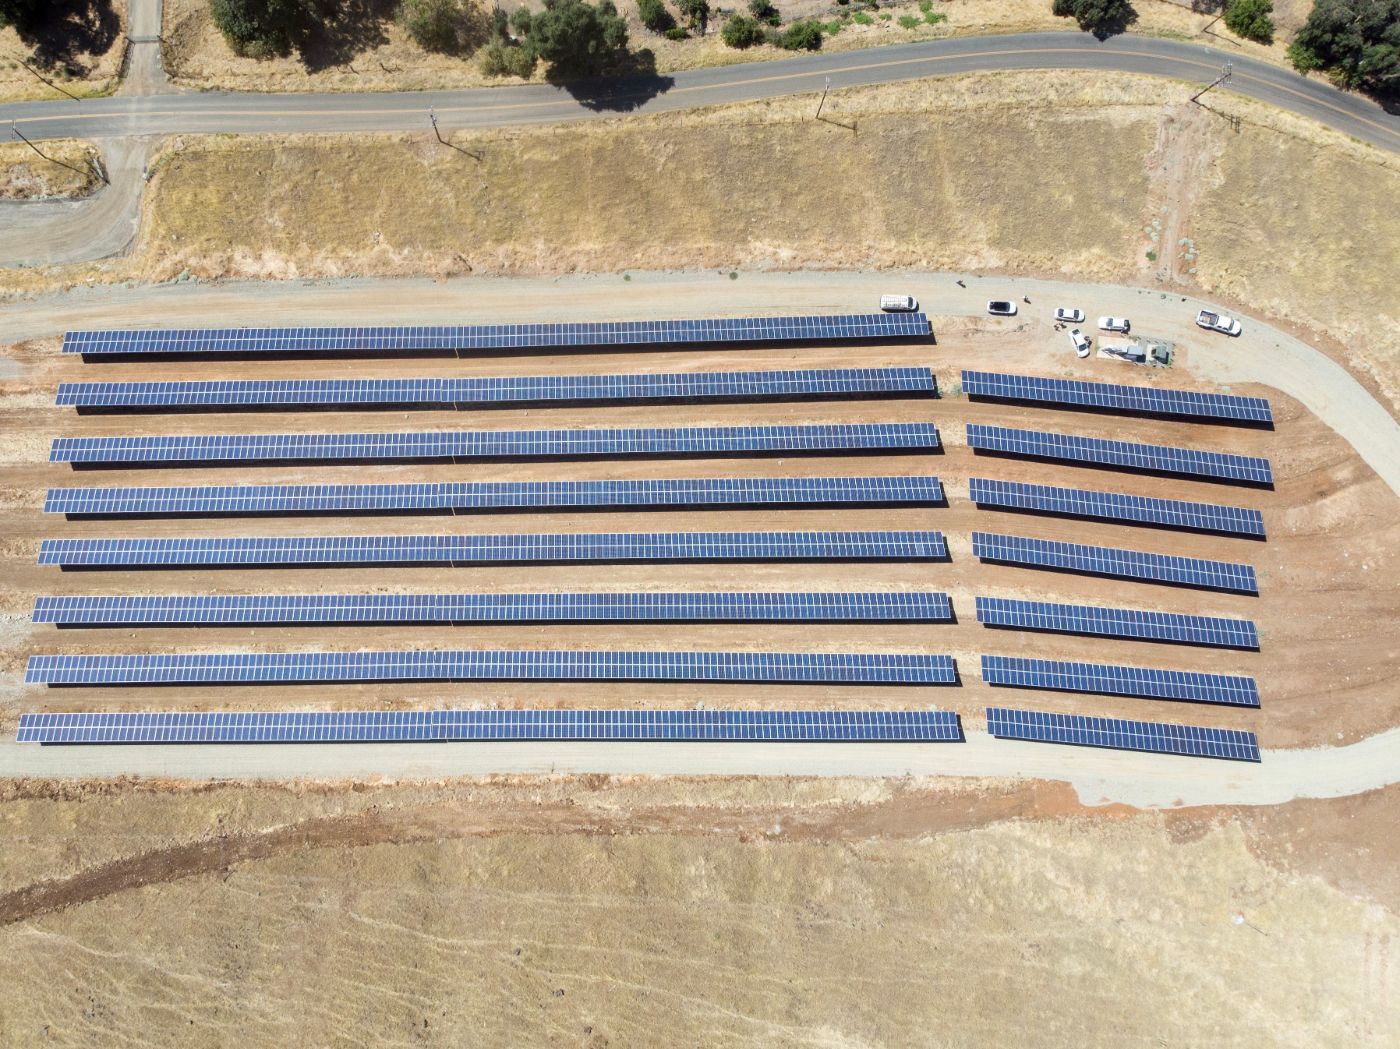 Aerial view of a small solar farm on brown grassland next to a two-lane road.